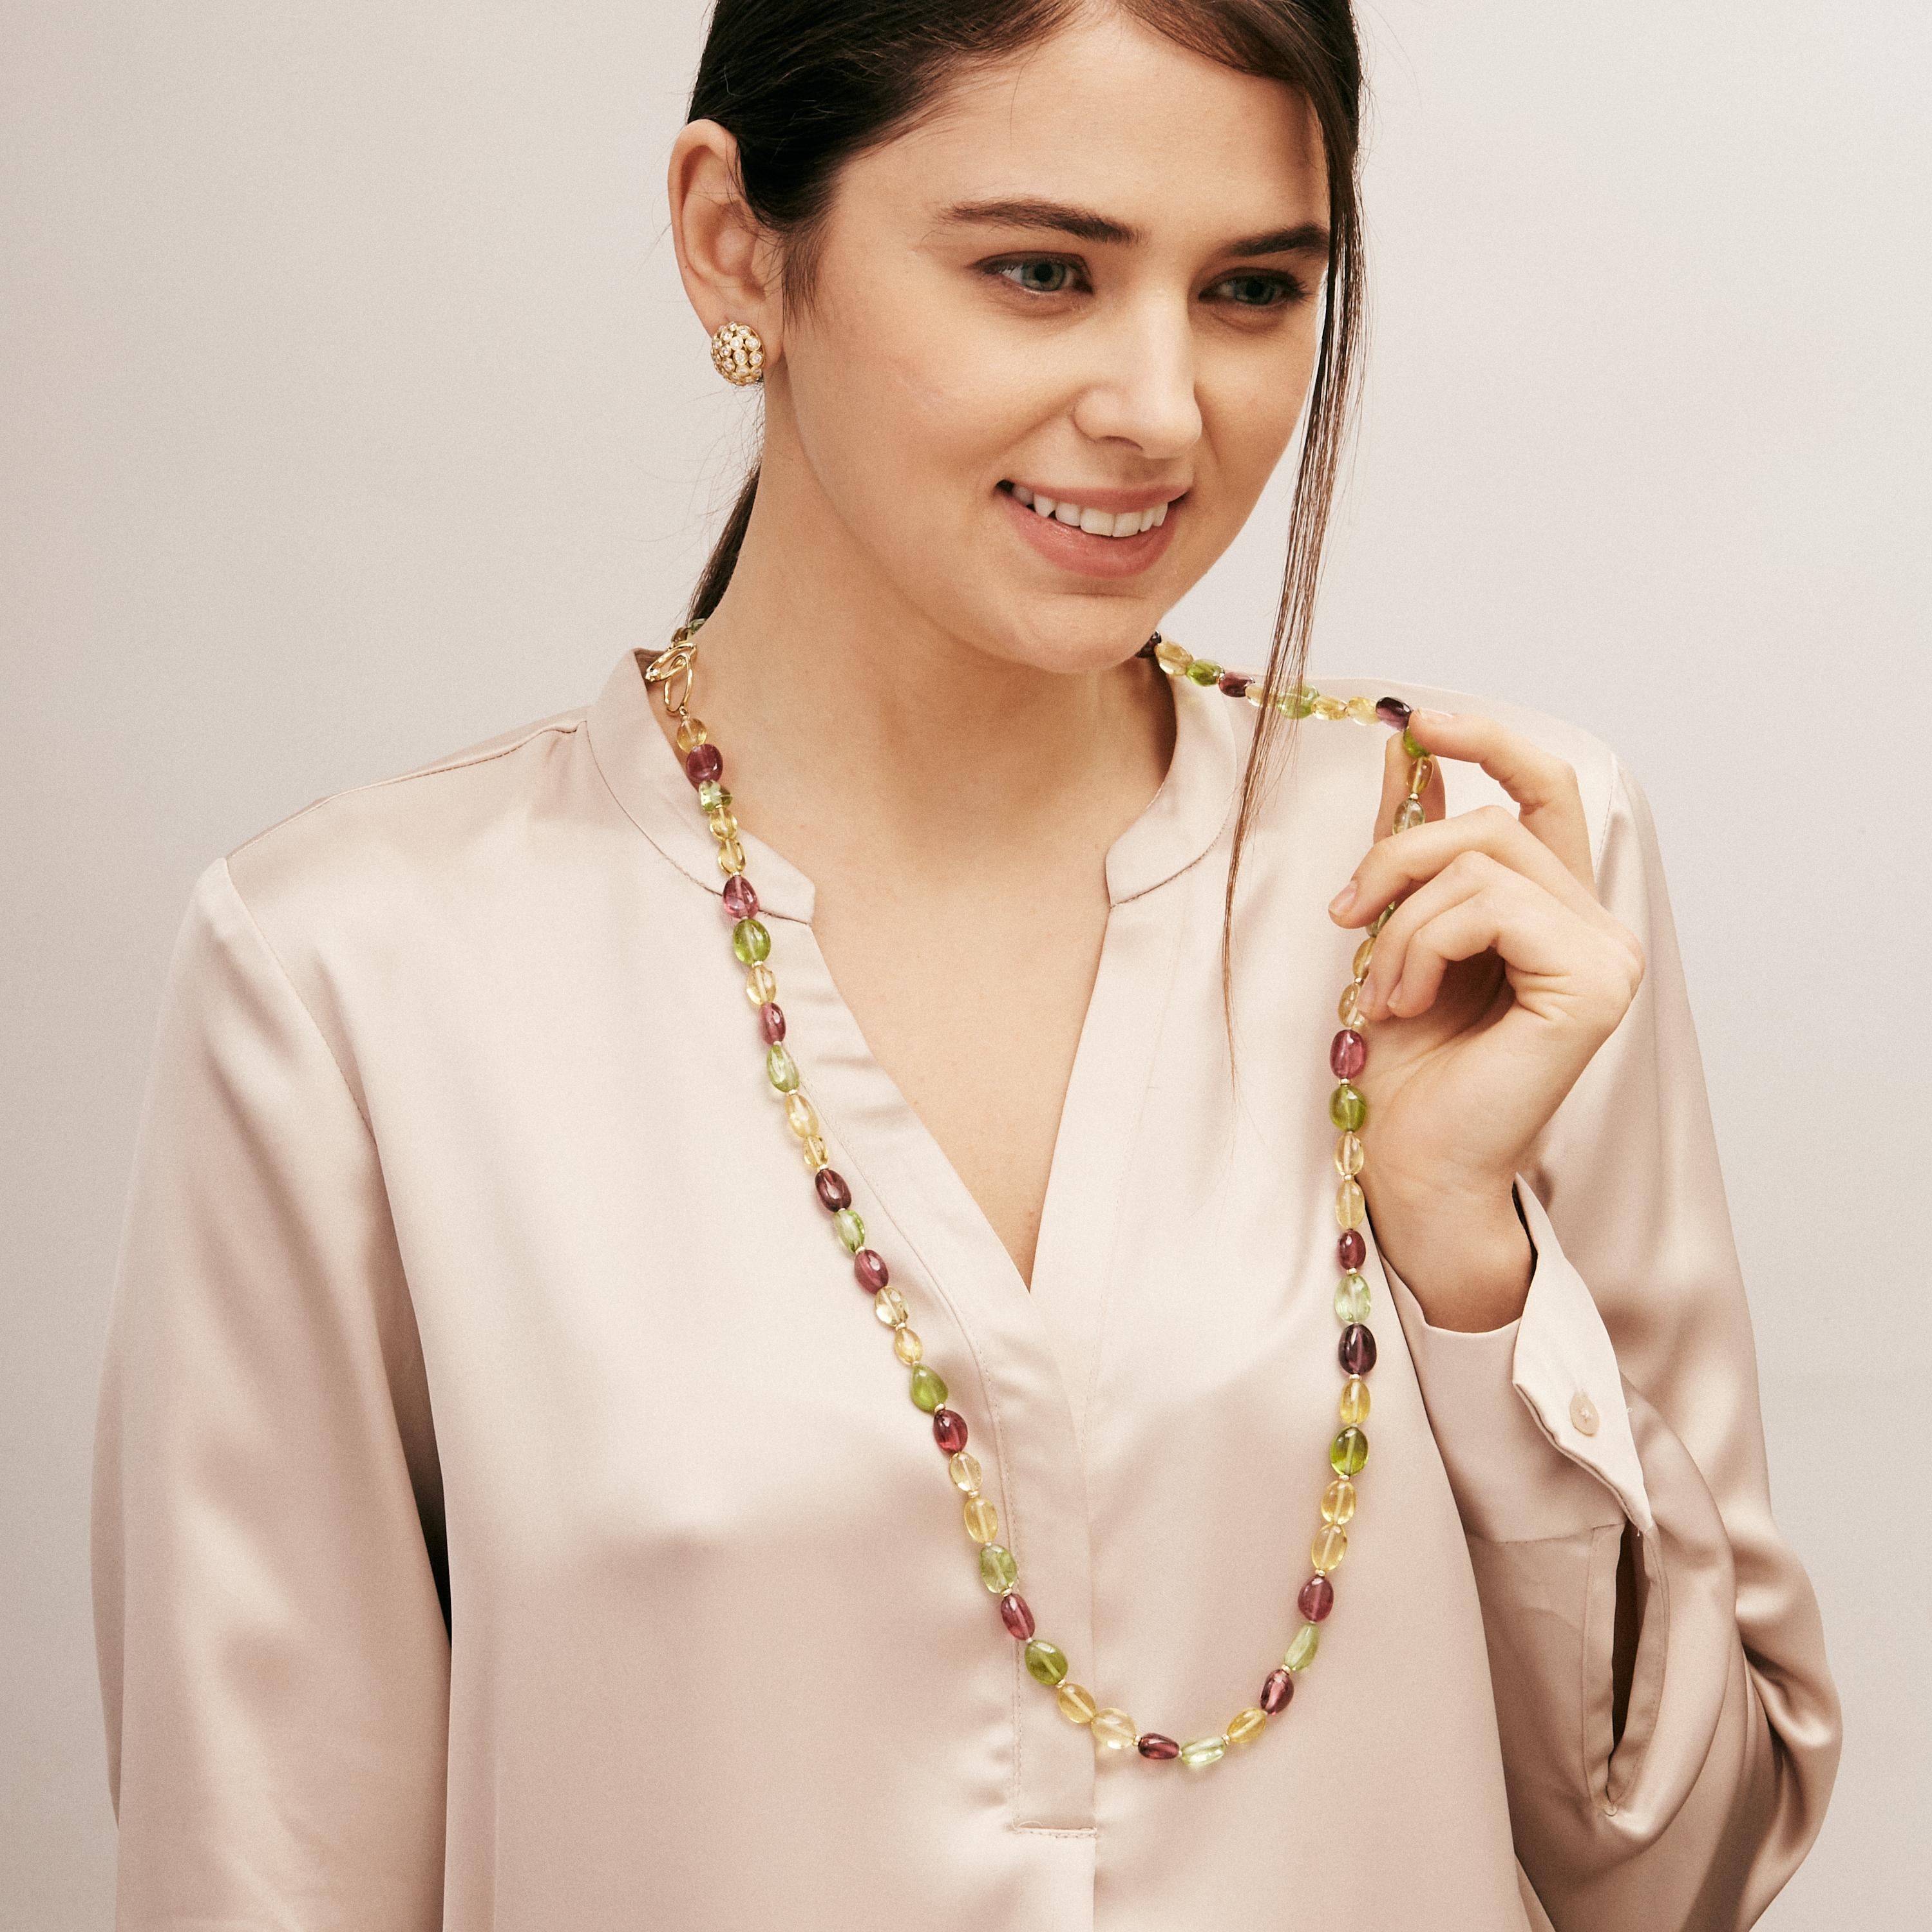 Created in 18 karat yellow gold
36 inch length
Rubellite, yellow beryl and peridot beads
18kyg small toggle clasp
Limited edition

Crafted of 18 karat yellow gold, this limited-edition necklace features a 36-inch chain adorned with rubellite, yellow